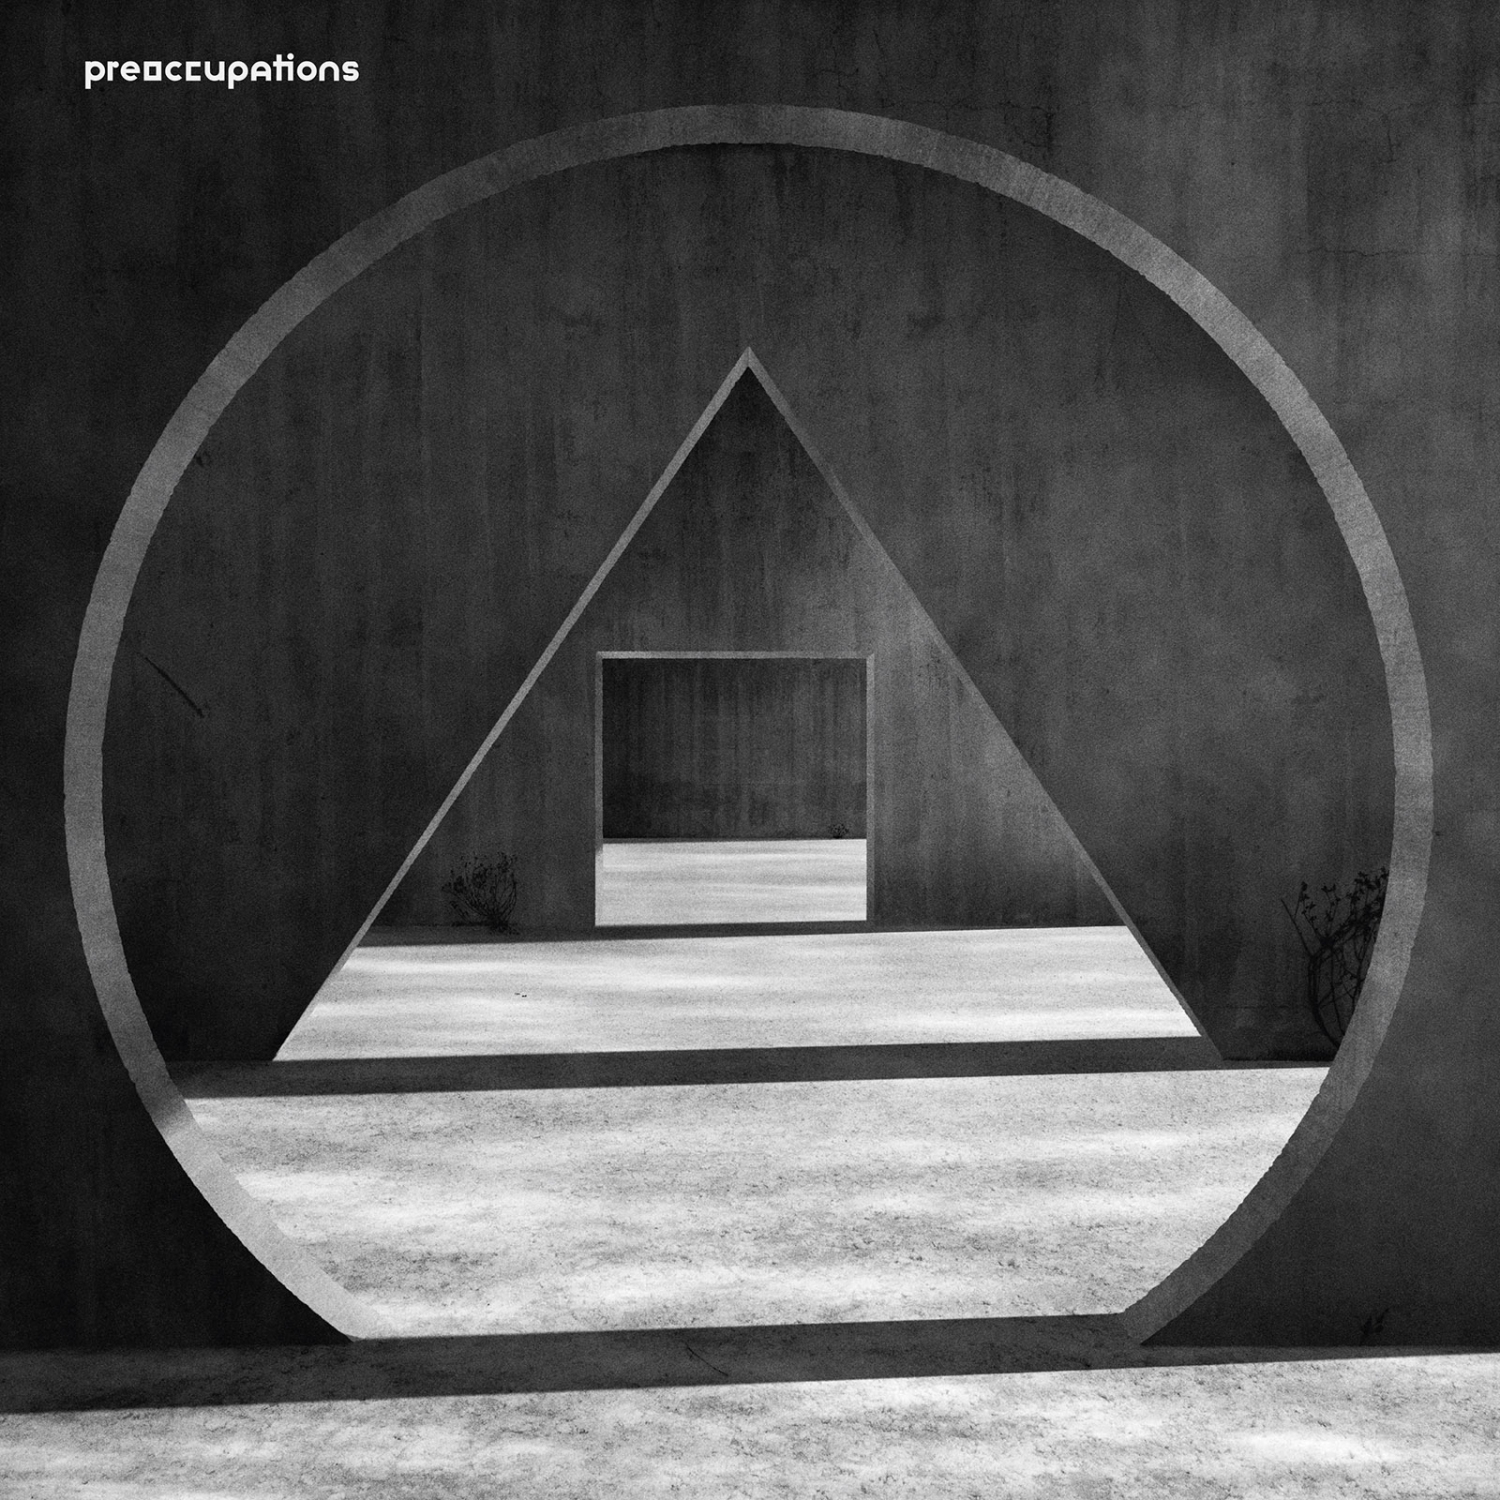 Preoccupations - New Material (Coloured Grey/Black V